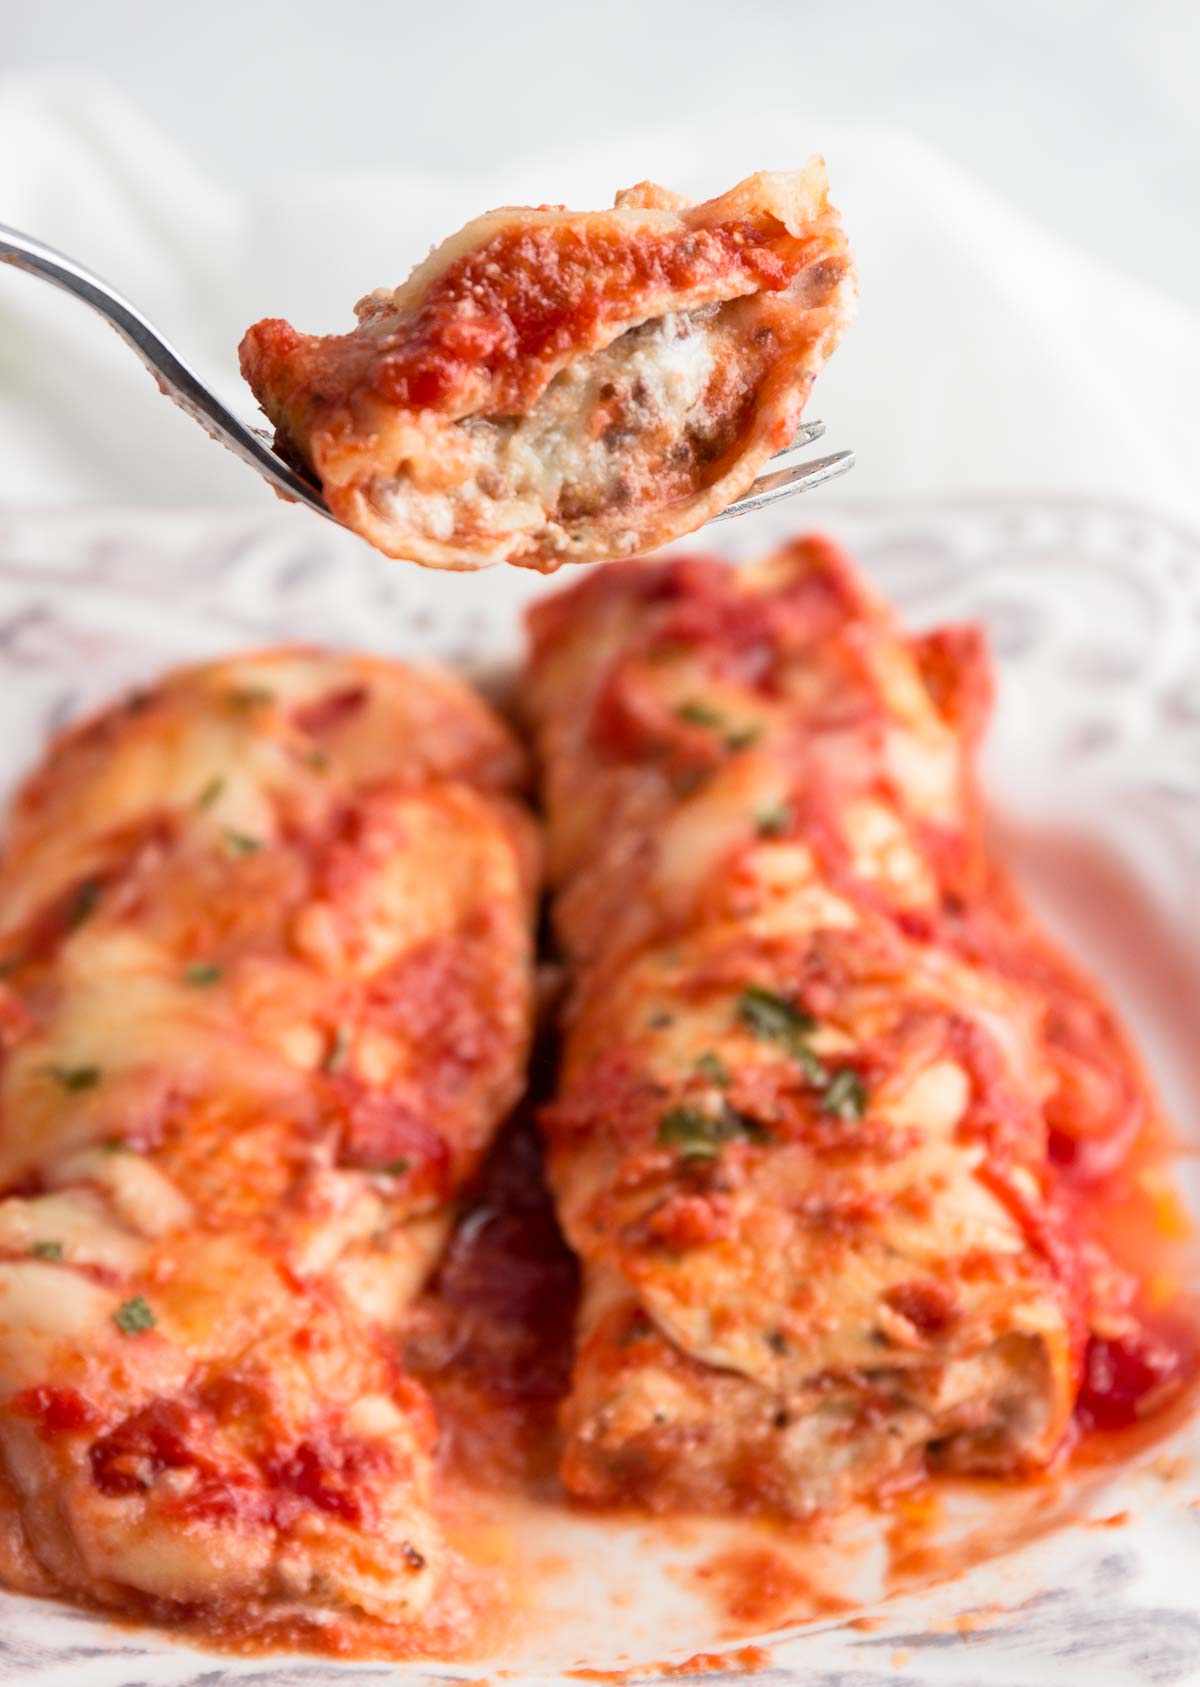 Two low carb beef and cheese manicotti rolls in sauce.